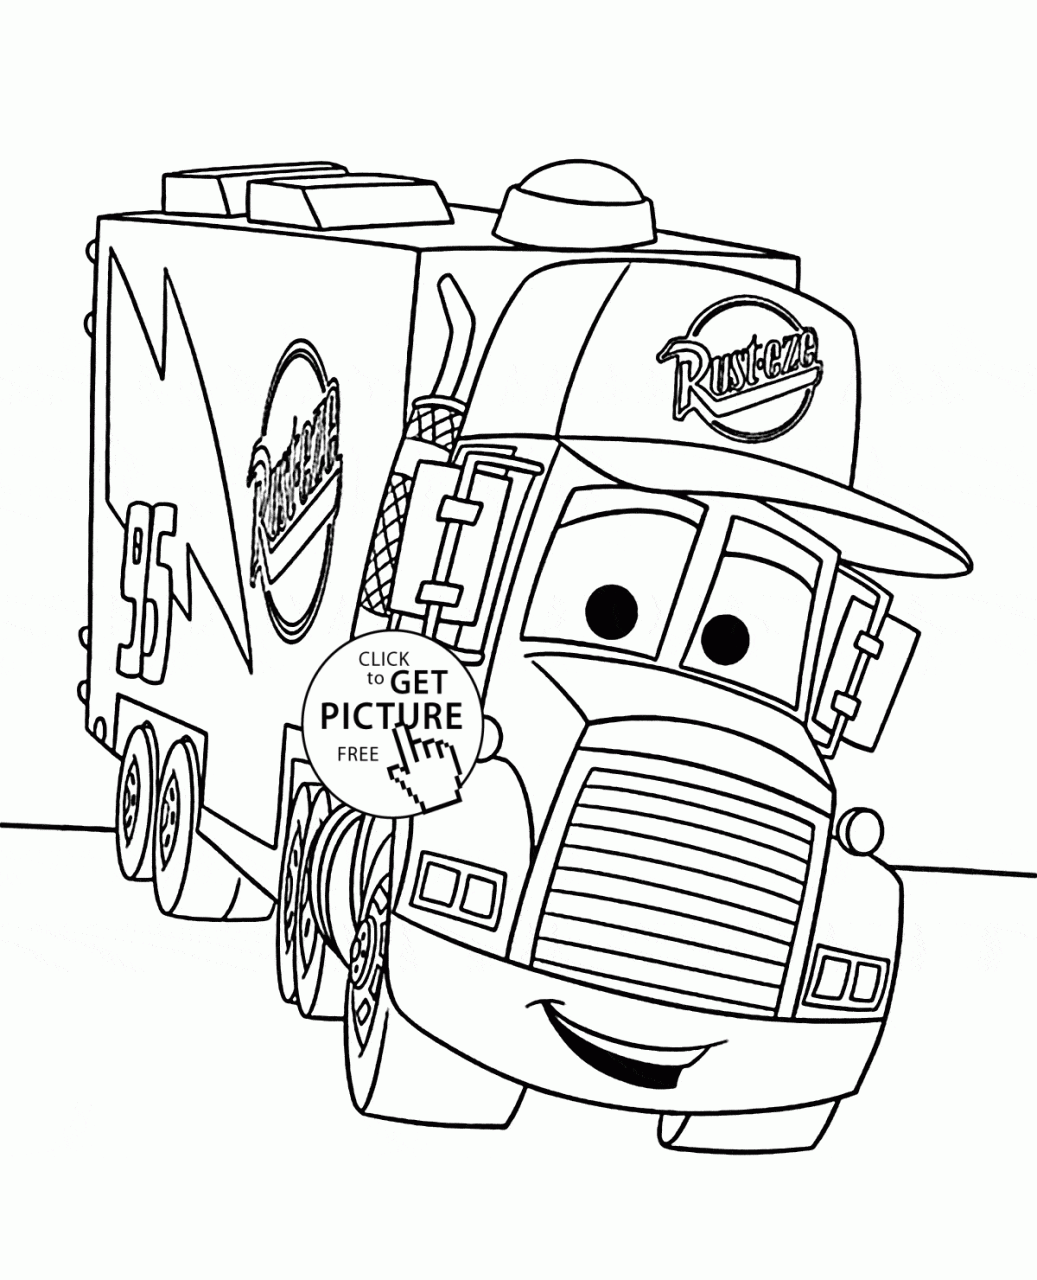 Cars Mack coloring page for kids, disney coloring pages printables free